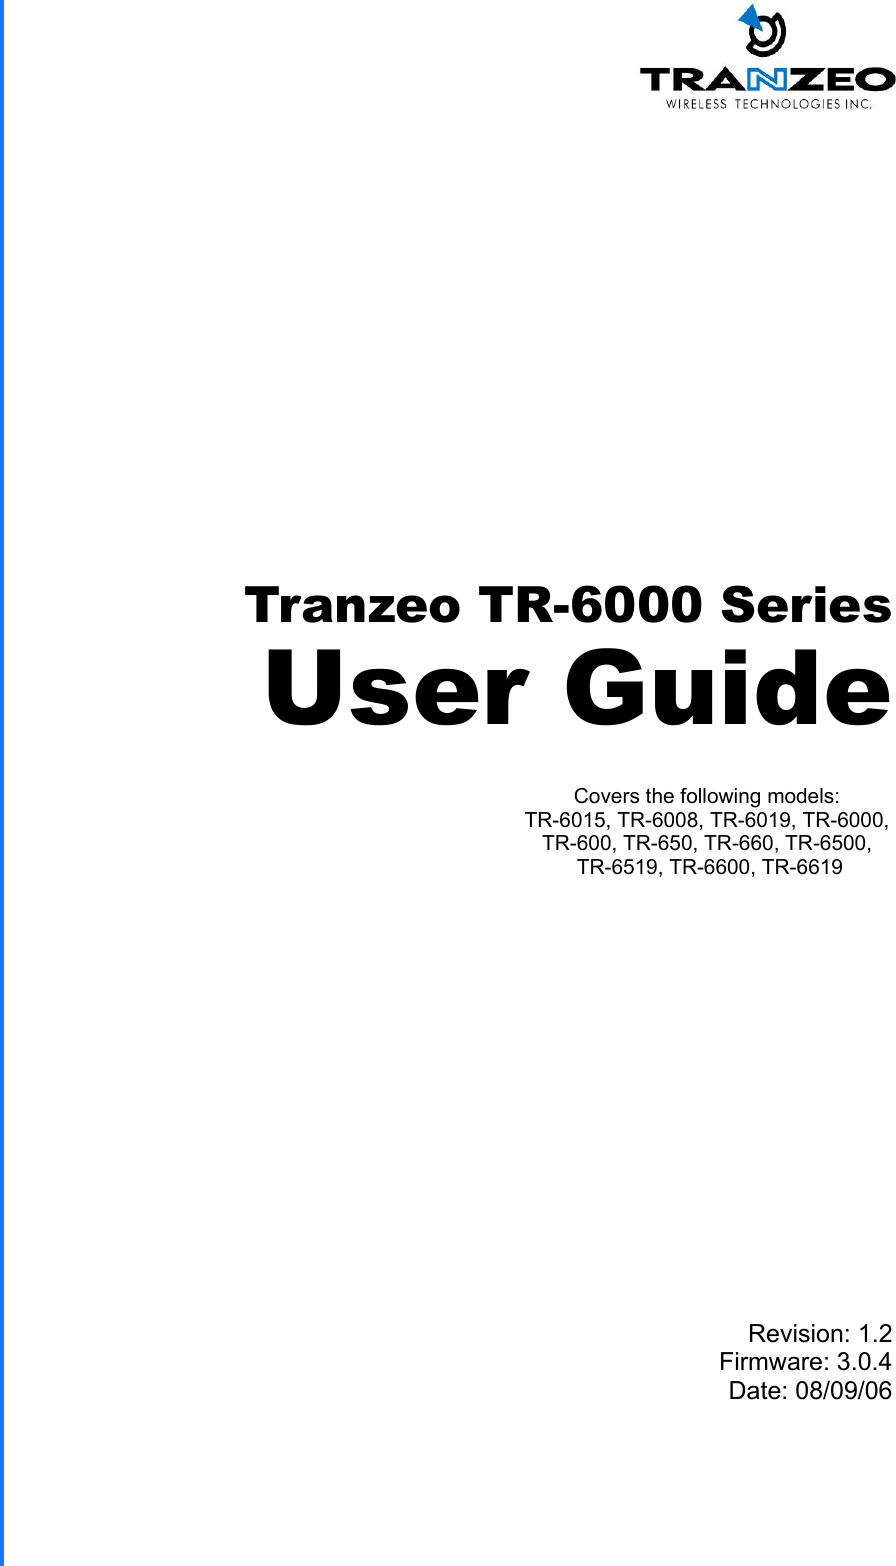  TRANZEO TR-6000 Revision: 1.2 Firmware: 3.0.4 Date: 08/09/06 Tranzeo TR-6000 Series User Guide Covers the following models:   TR-6015, TR-6008, TR-6019, TR-6000,  TR-600, TR-650, TR-660, TR-6500,  TR-6519, TR-6600, TR-6619 